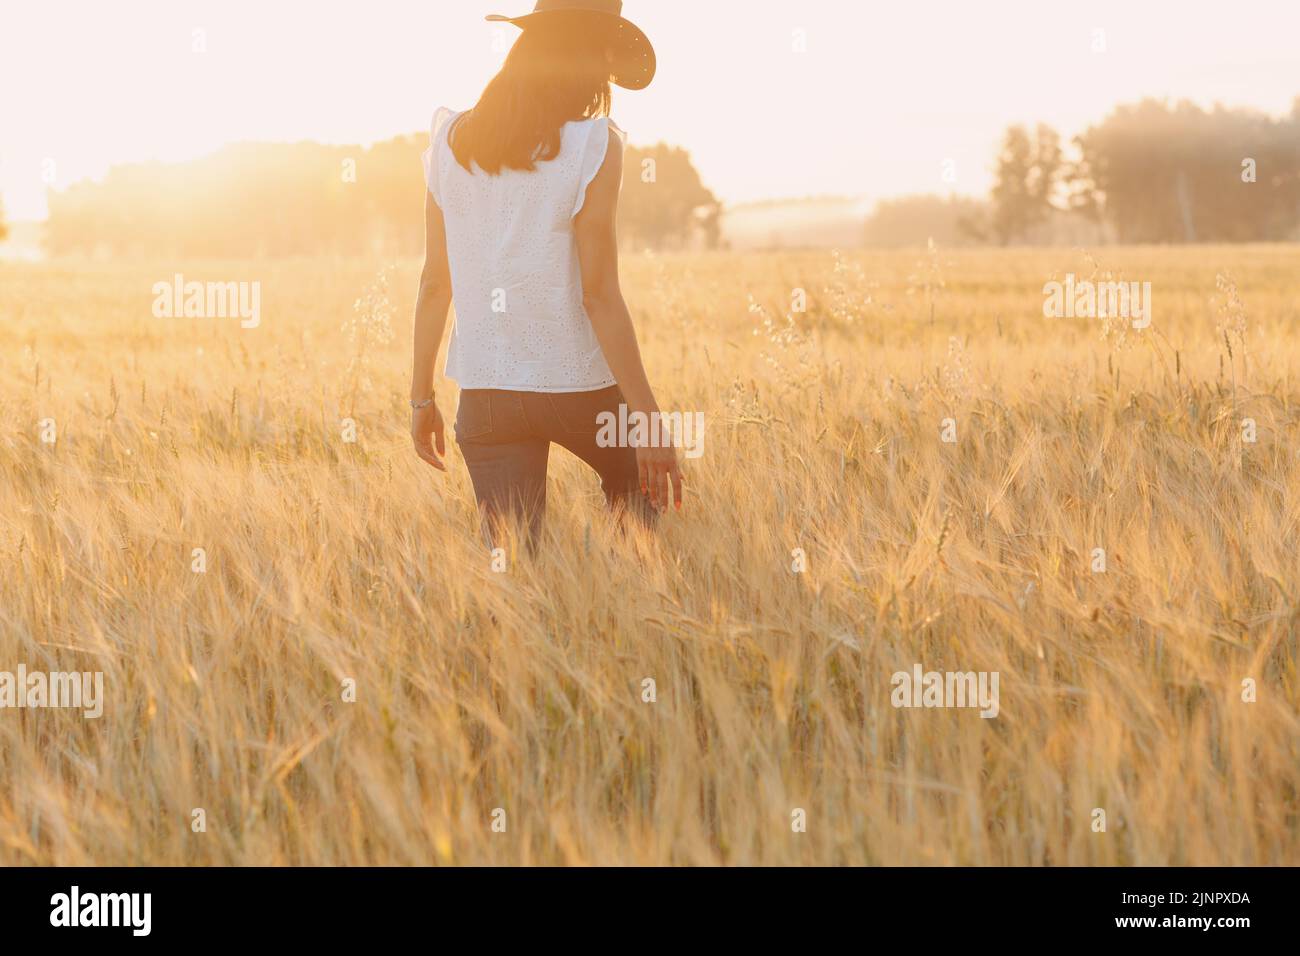 Woman farmer in cowboy hat walking with hands on ears at agricultural field on sunset. Stock Photo